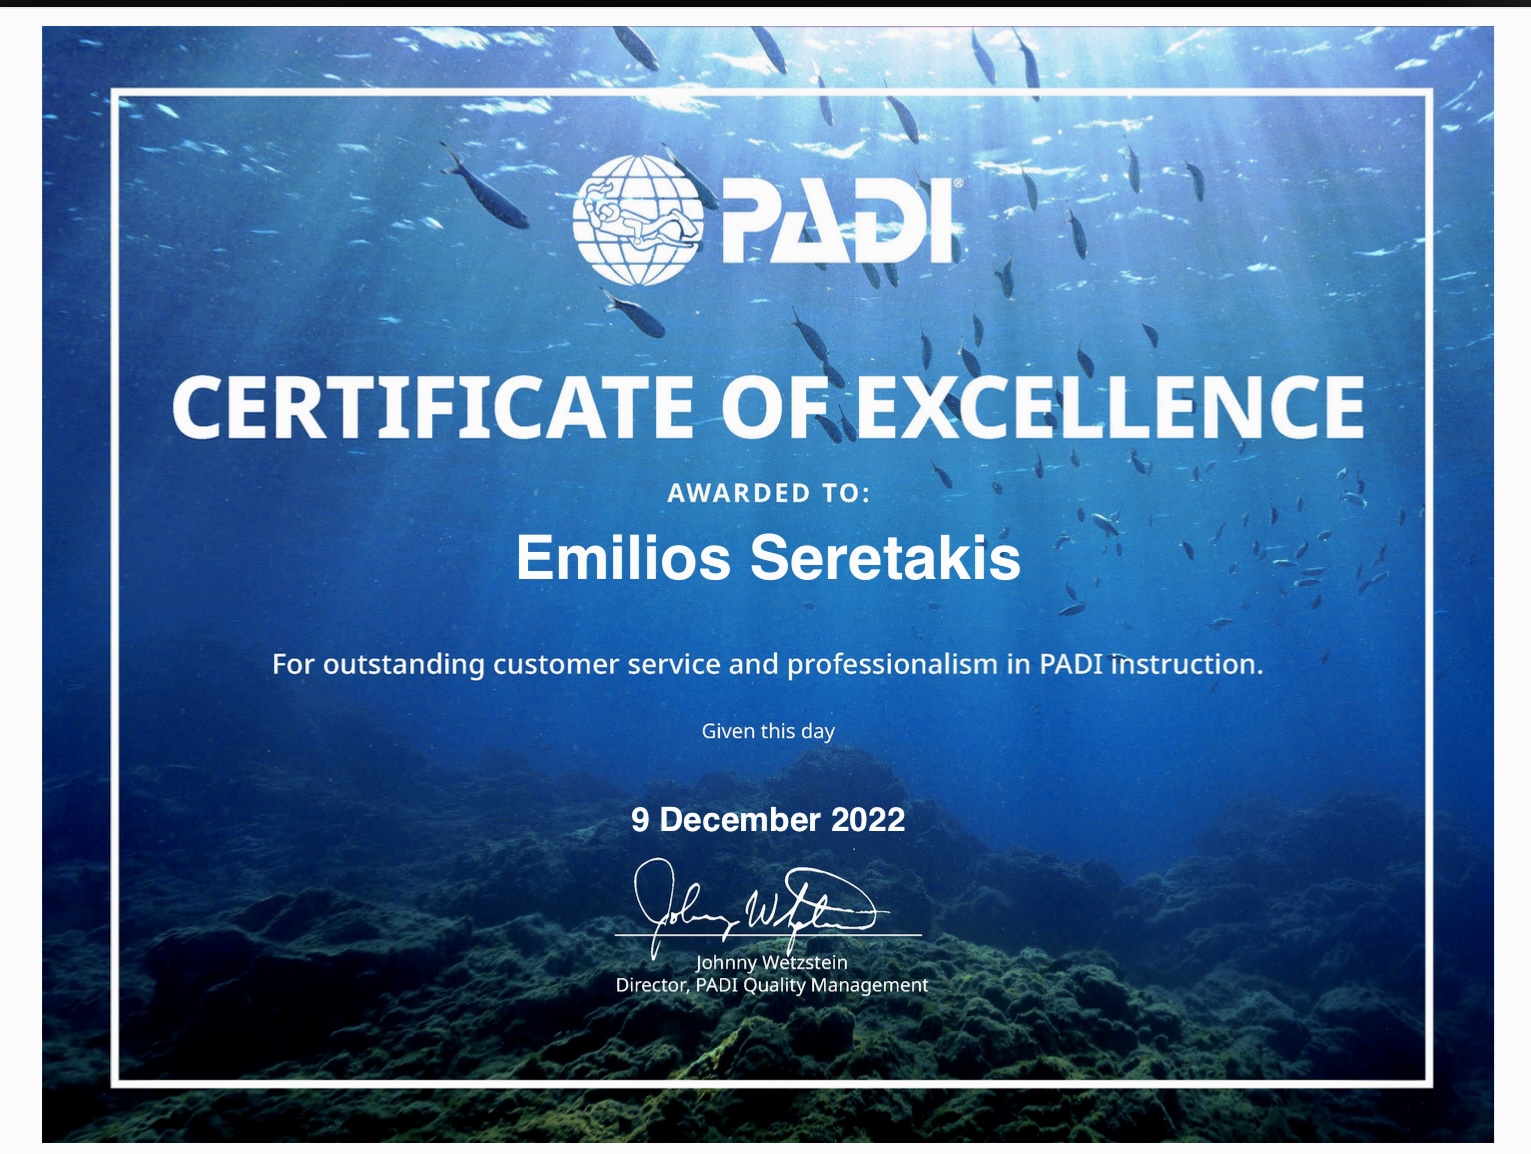 PADI certificate of excellence 2022